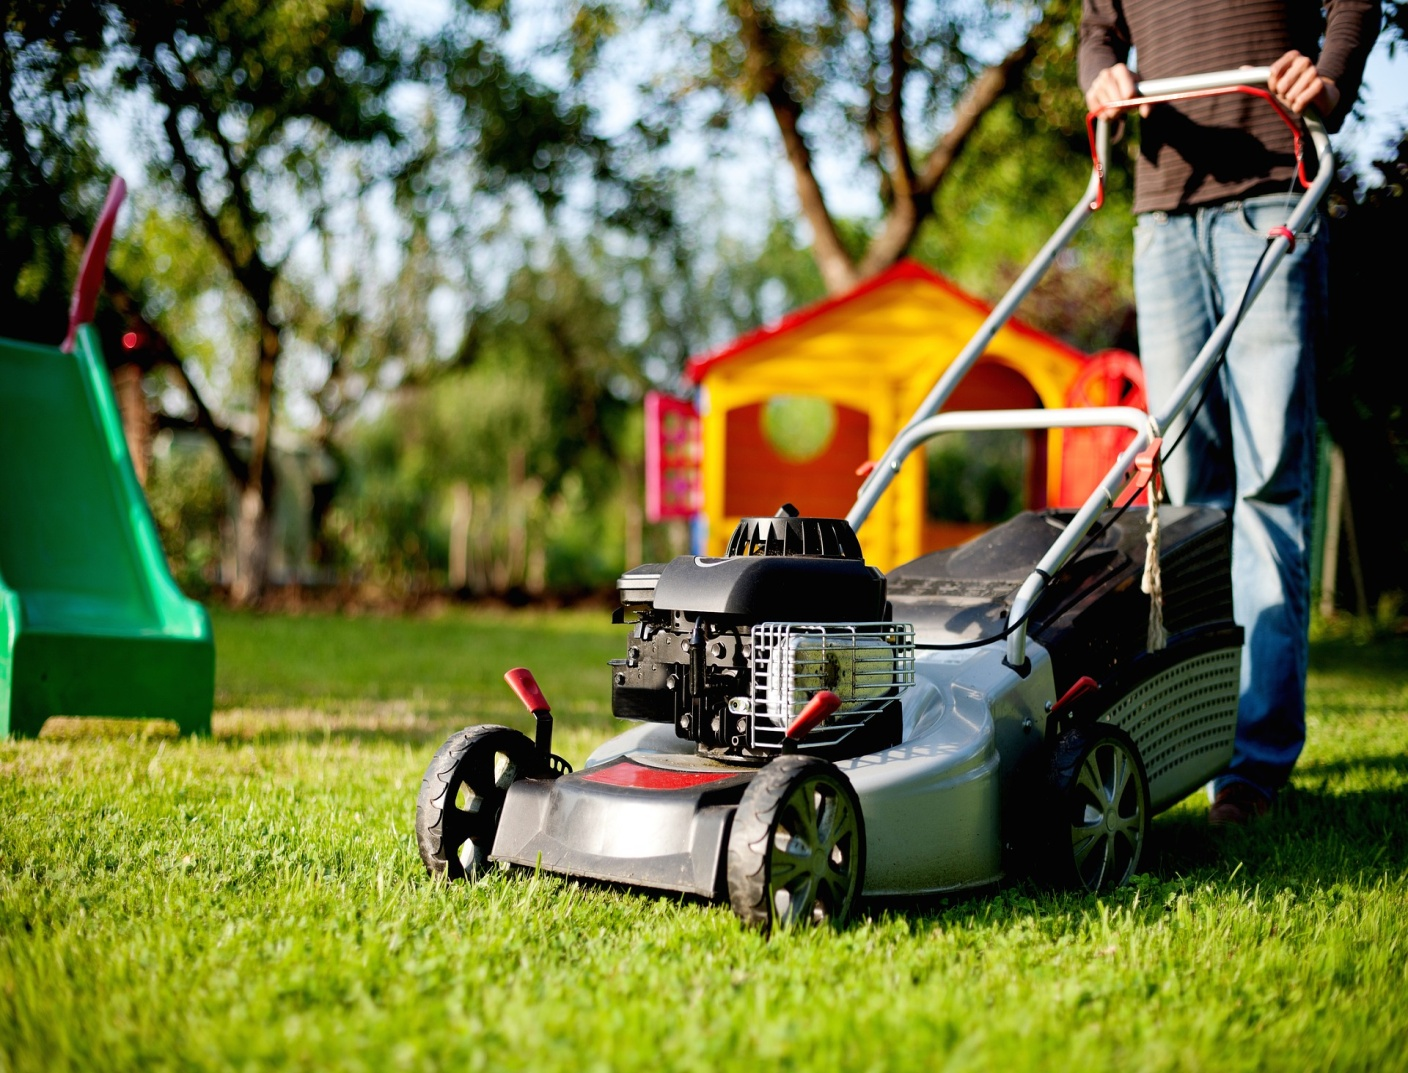 How Much Does Lawn Care Typically Cost